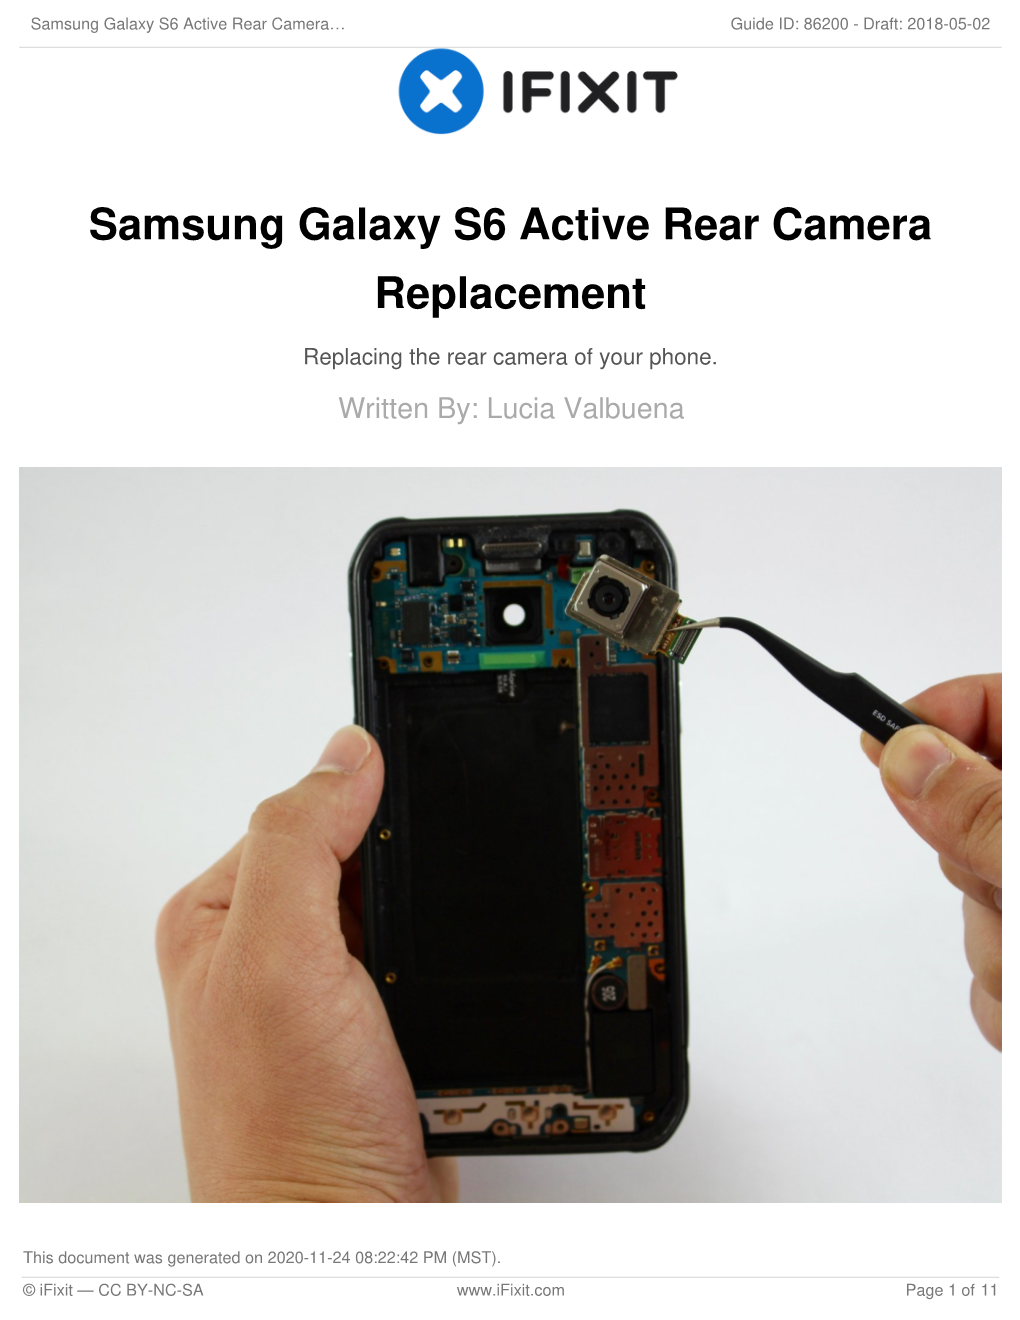 Samsung Galaxy S6 Active Rear Camera Replacement